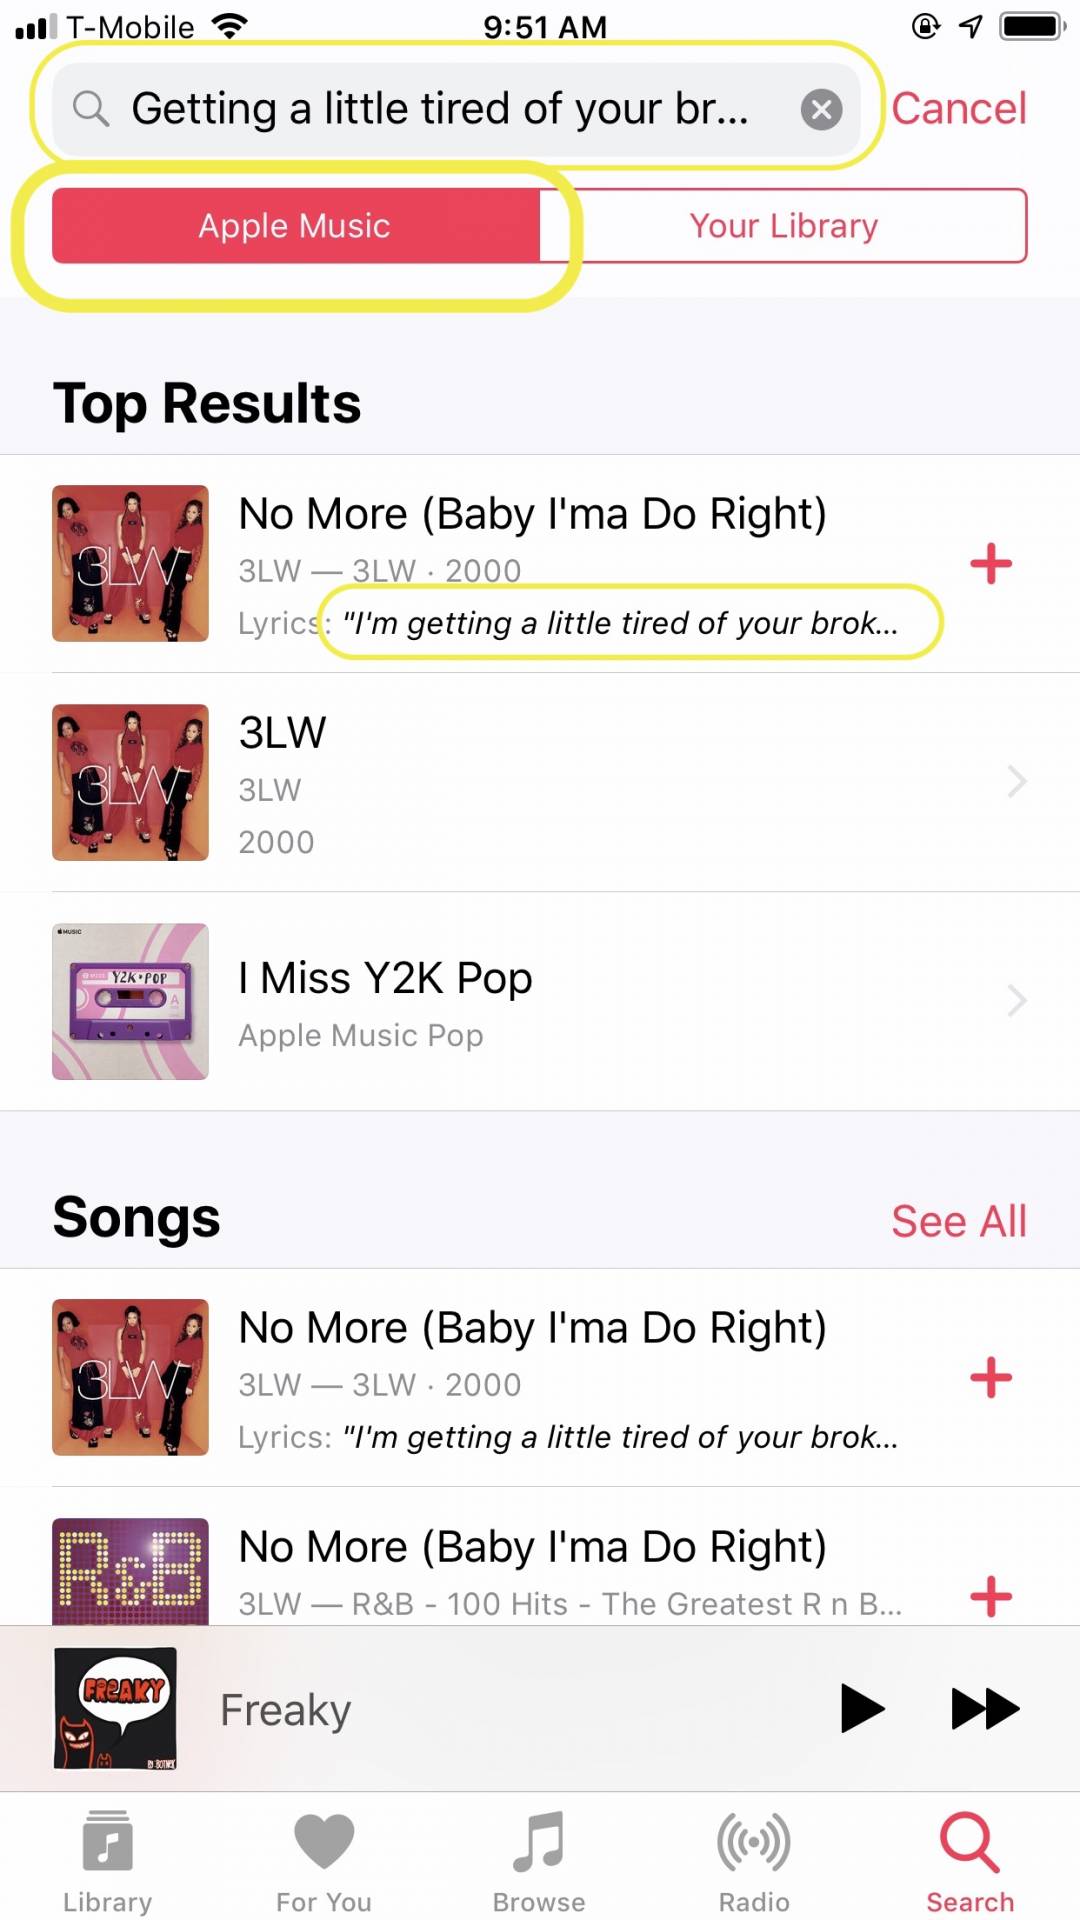 How To Search For Songs With Lyrics In Apple Music 2